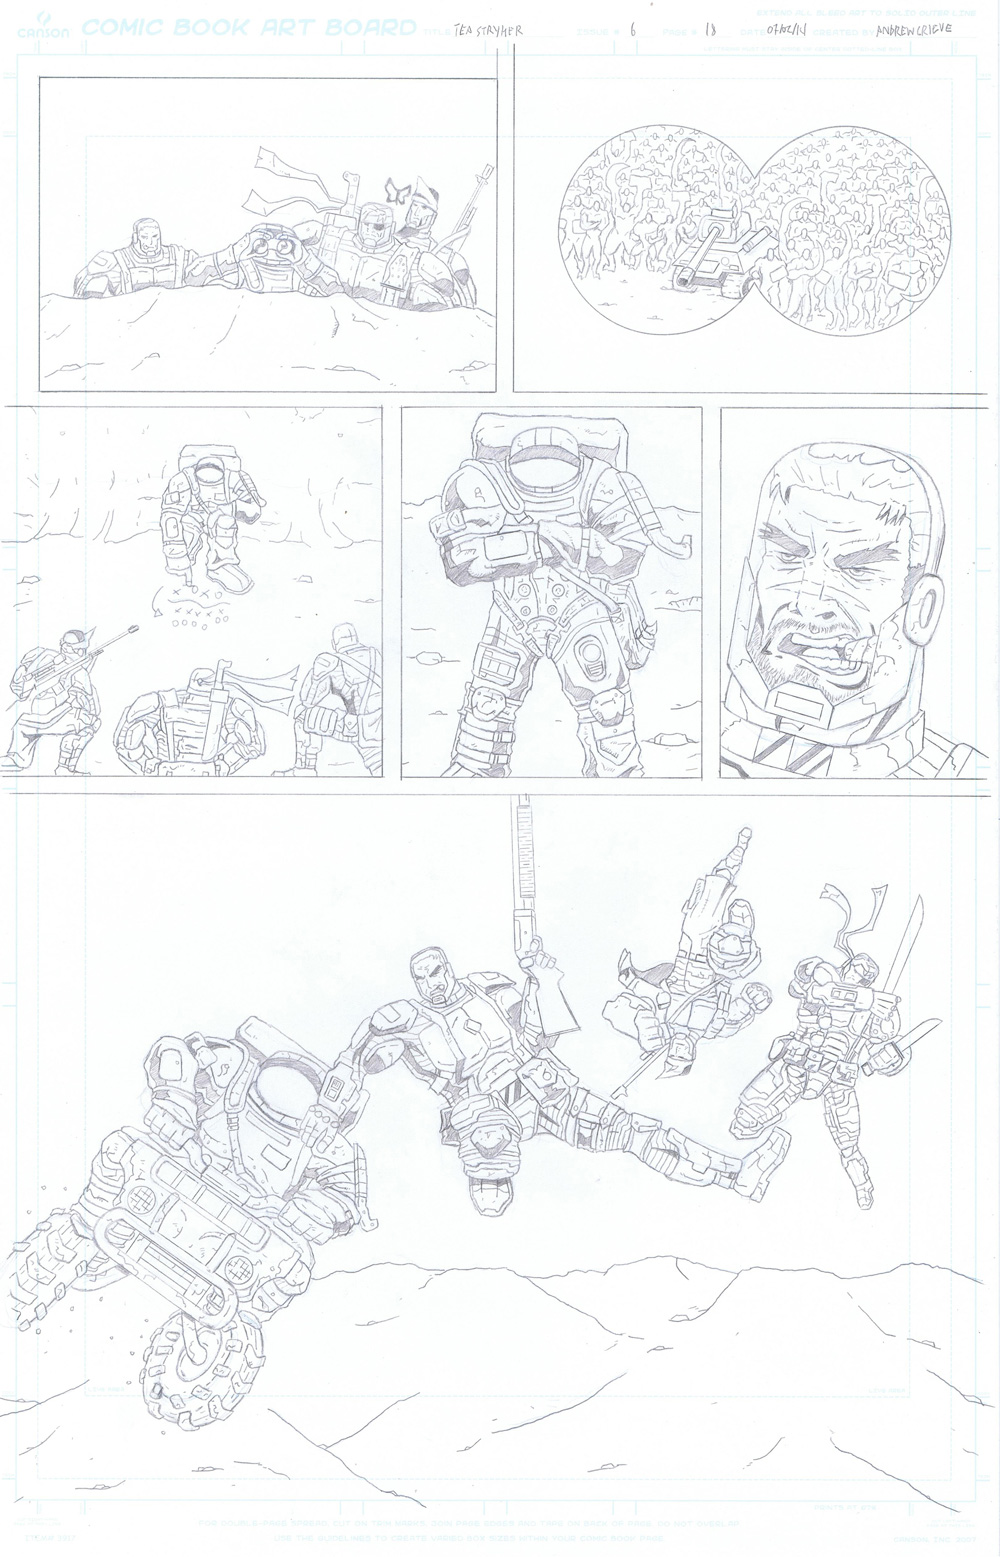 MISSION 006: PAGE 18 PENCIL